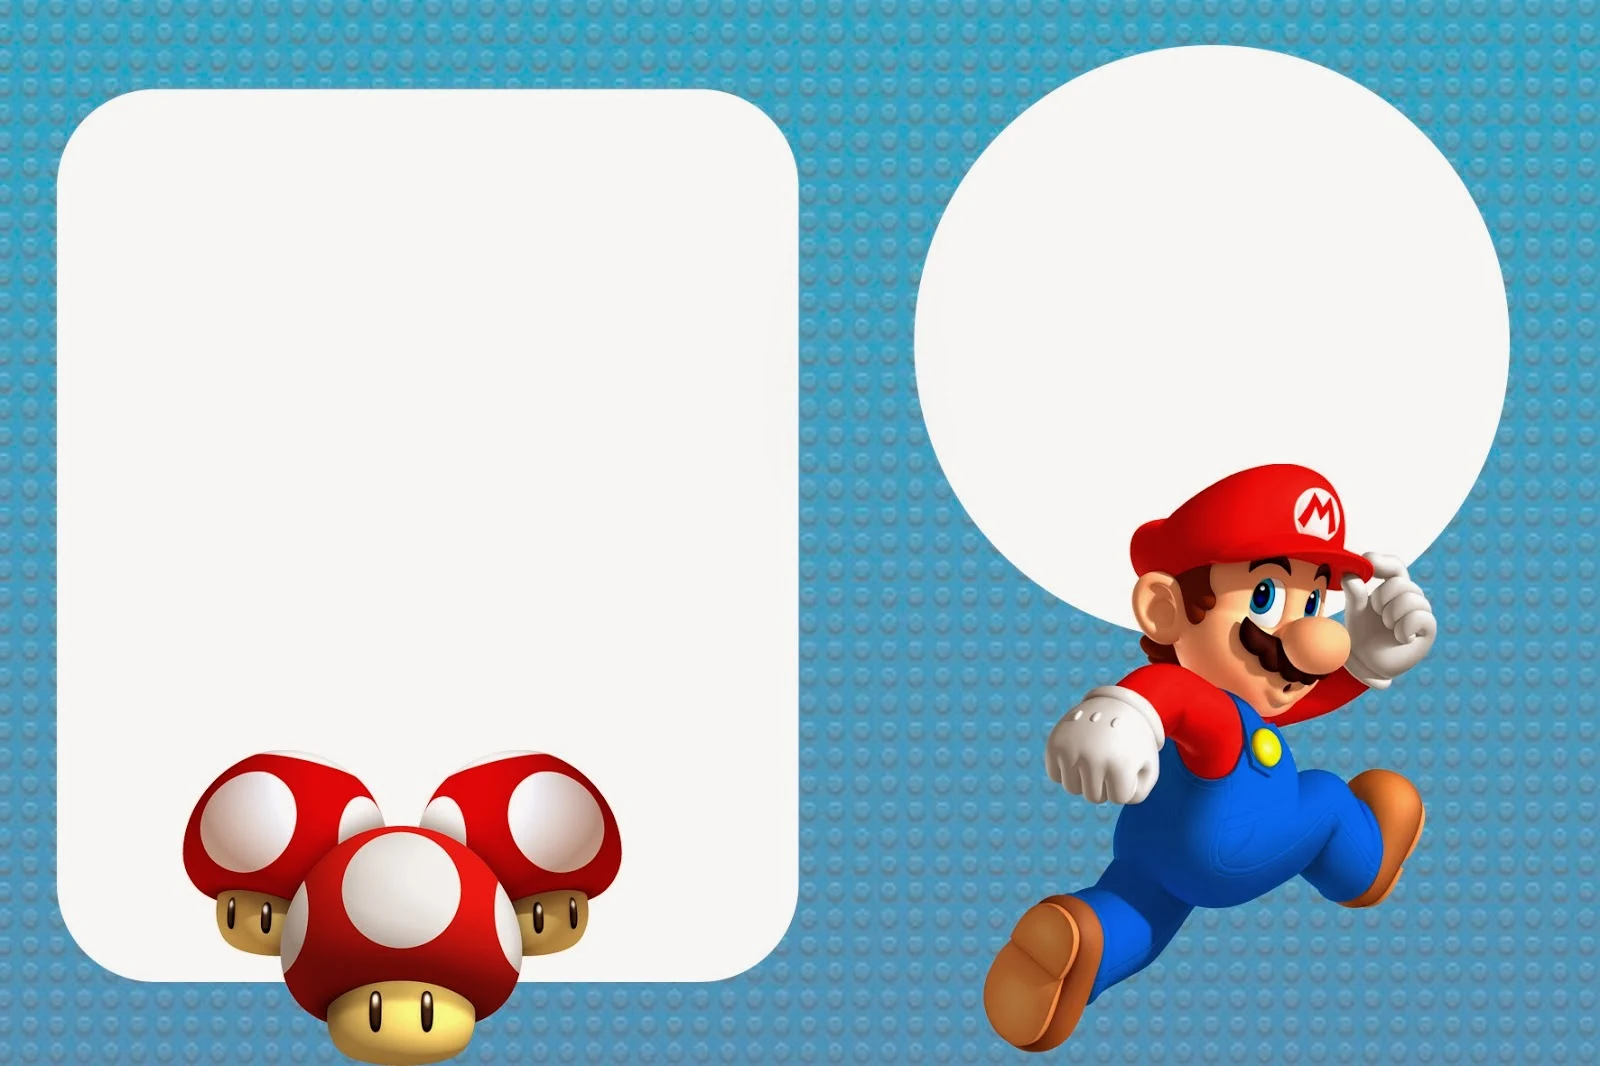 Super Mario Bros Free Party Printables and Invitations. - Oh My